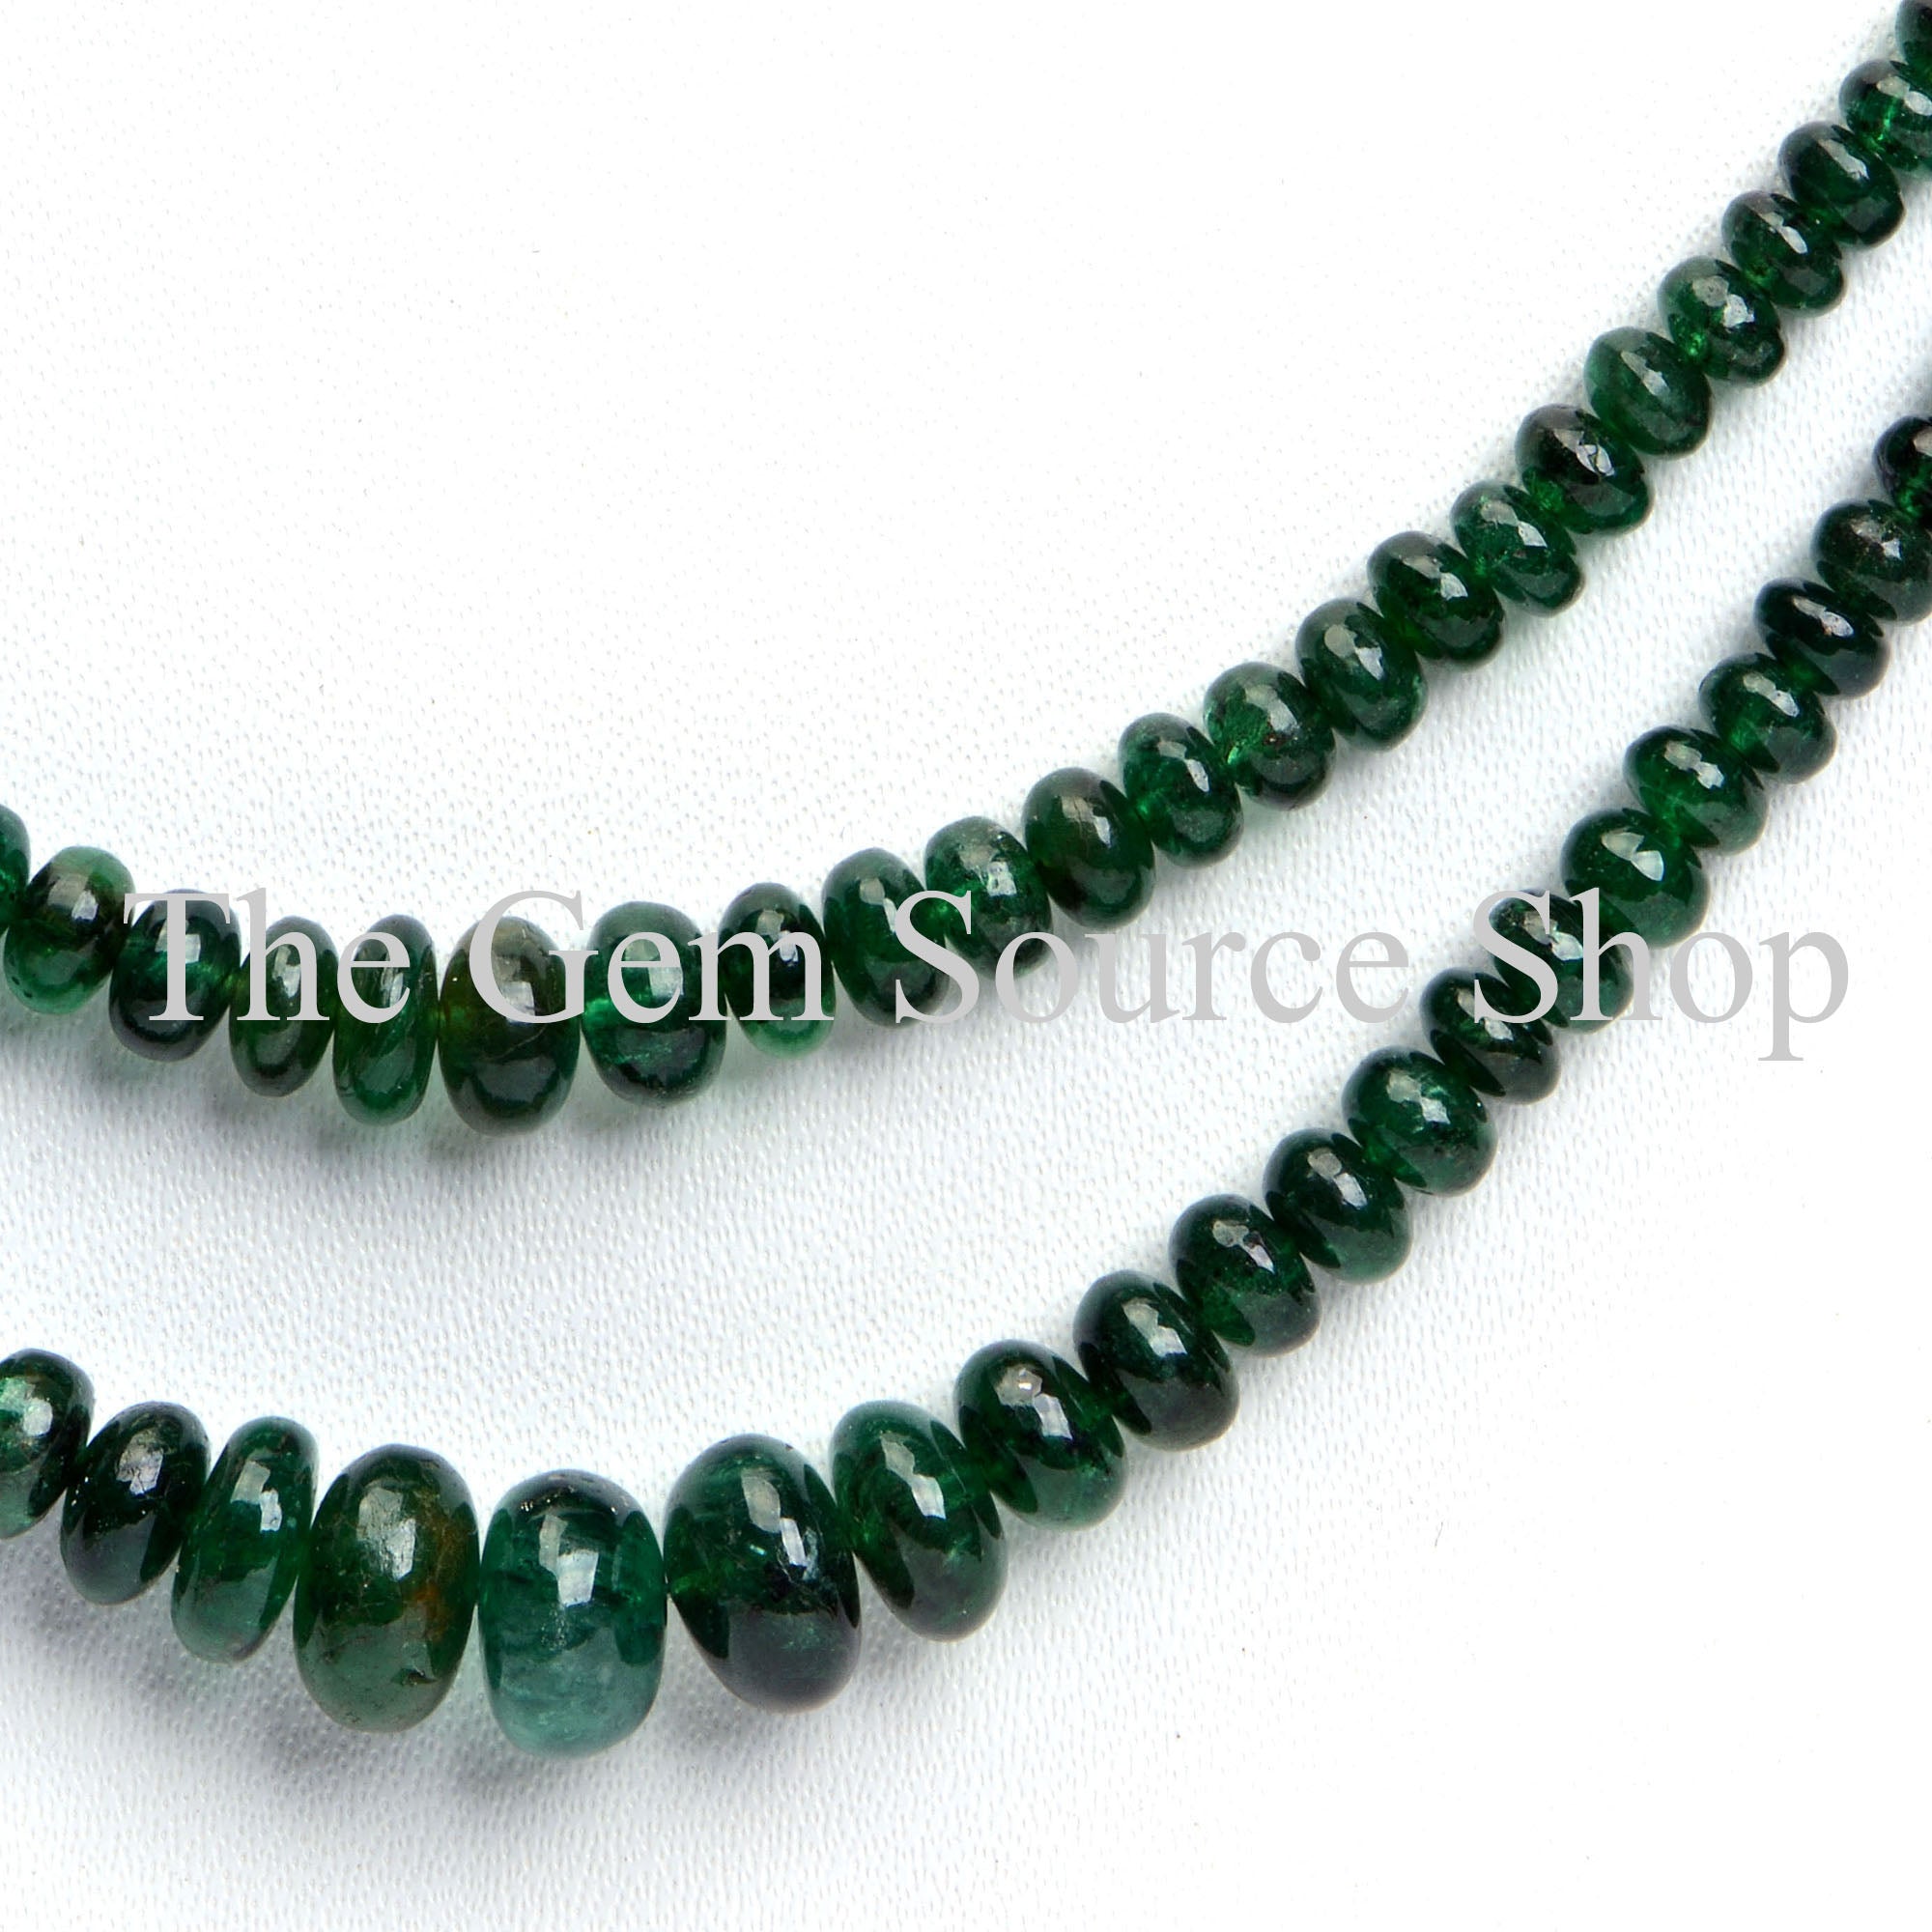 Emerald Smooth Rondelle Shape Gemstone Necklace TGS-2205